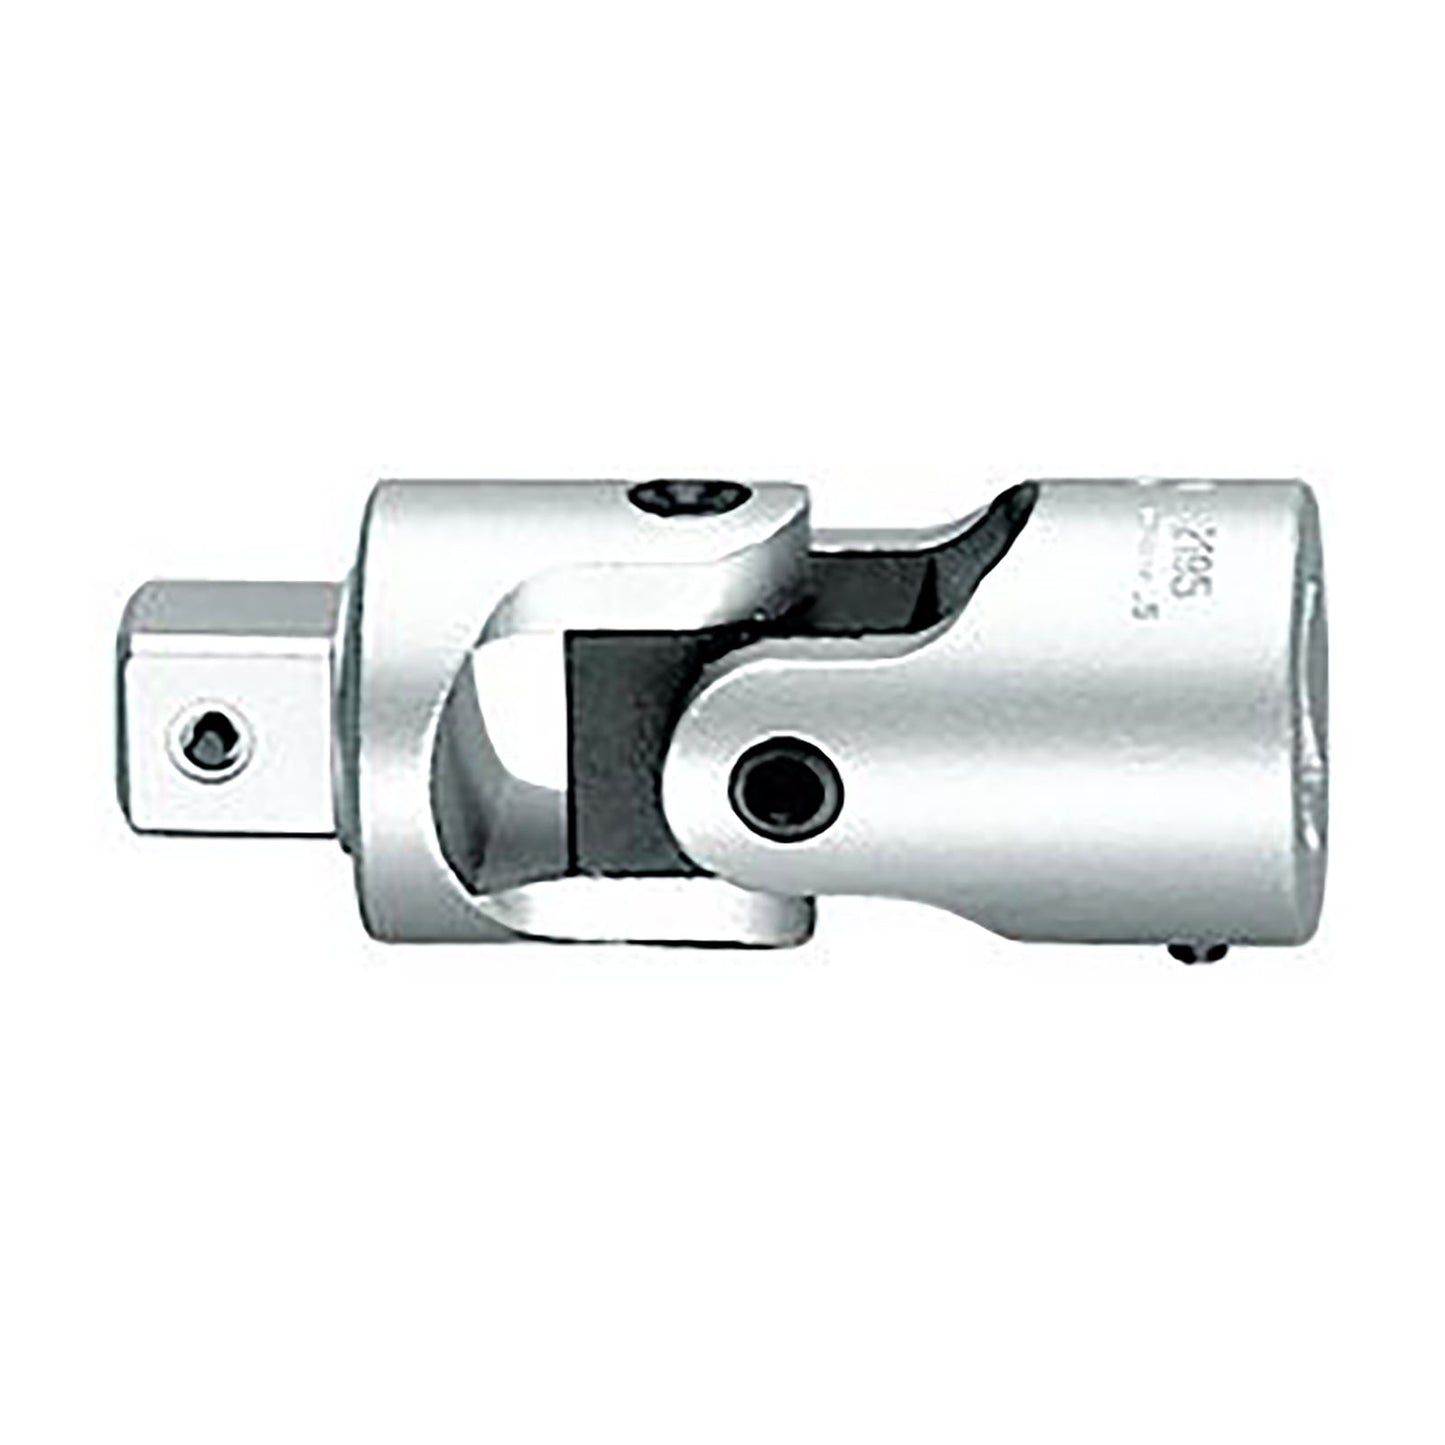 GEDORE 2195 - Universal Joint 1" (6180980)